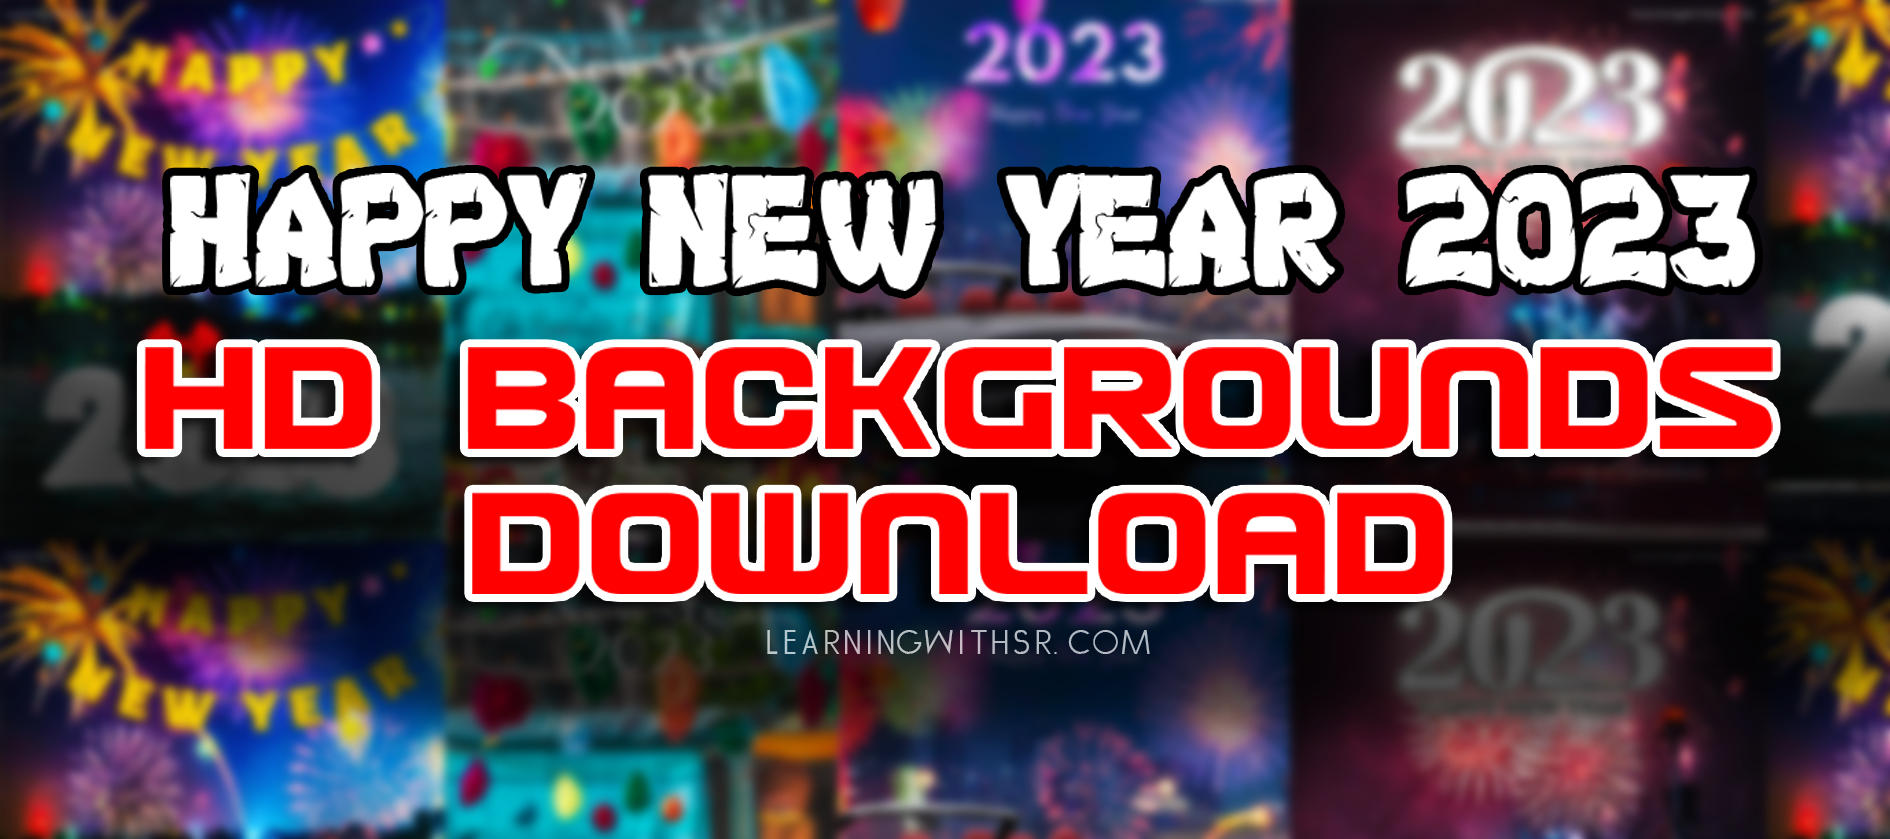 Happy new year 2023 hd background download latest - LEARNINGWITHSR